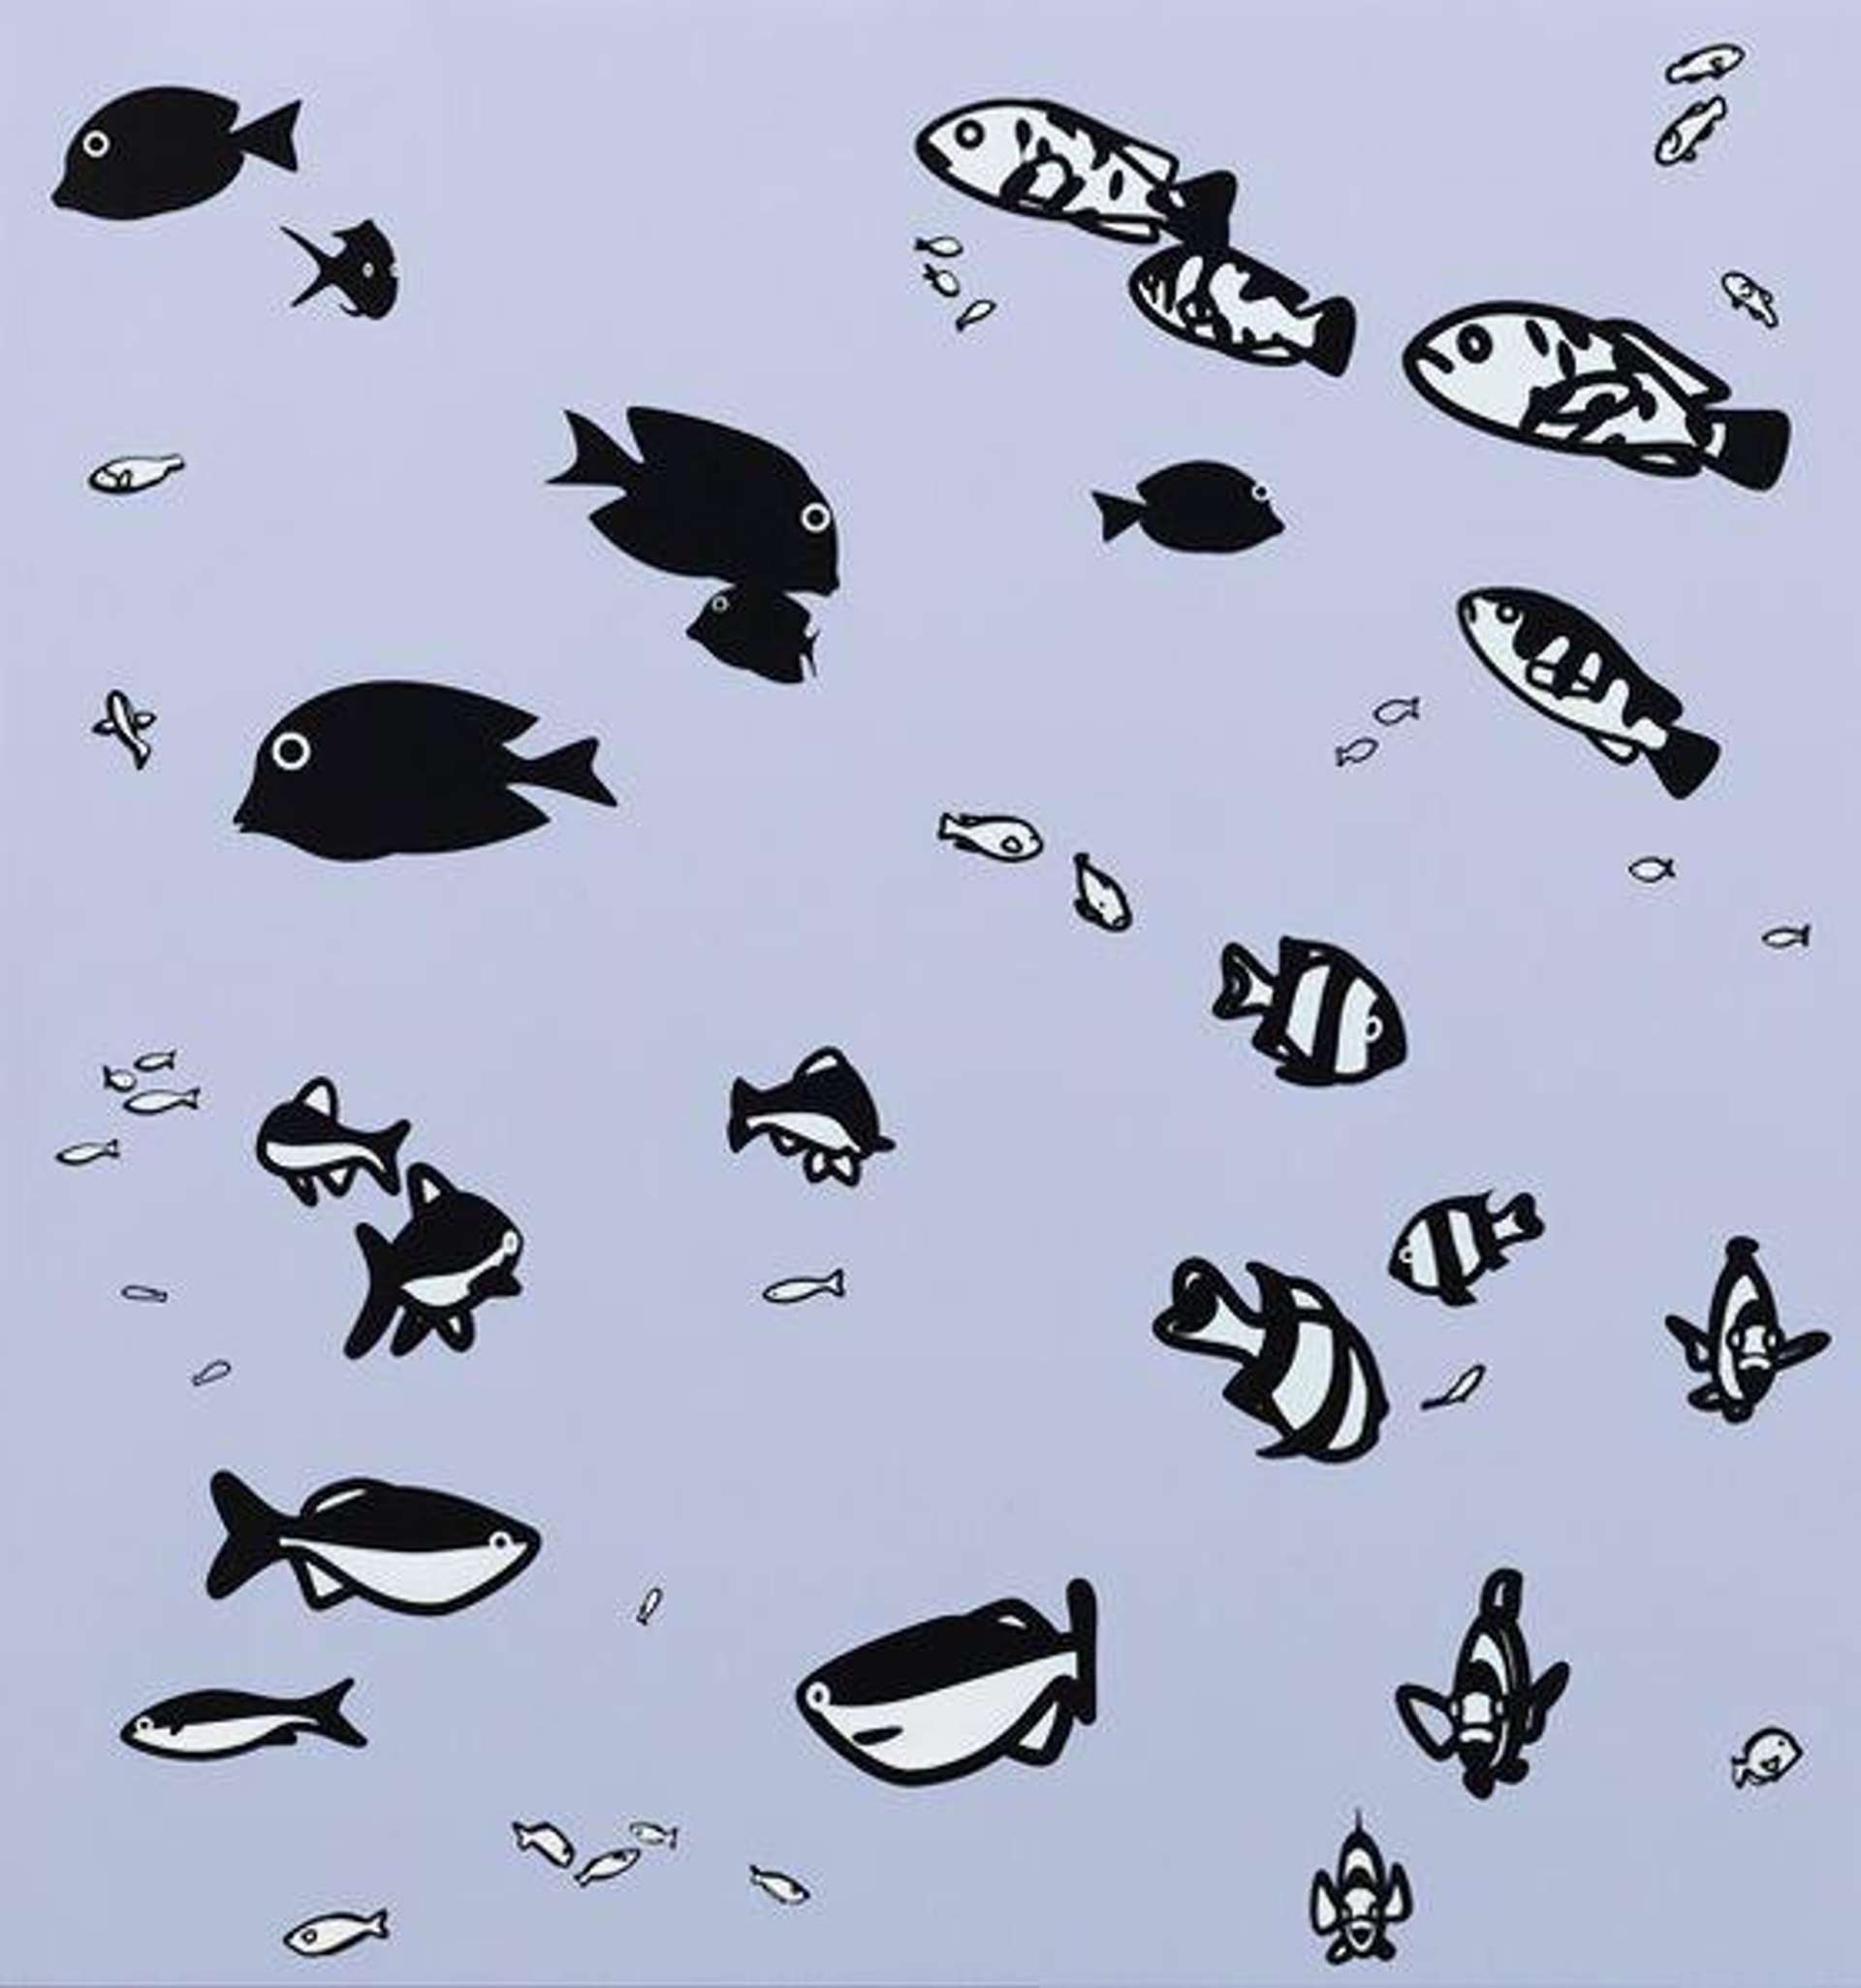 Julian Opie: We Swam Amongst The Fishes 1 - Signed Print